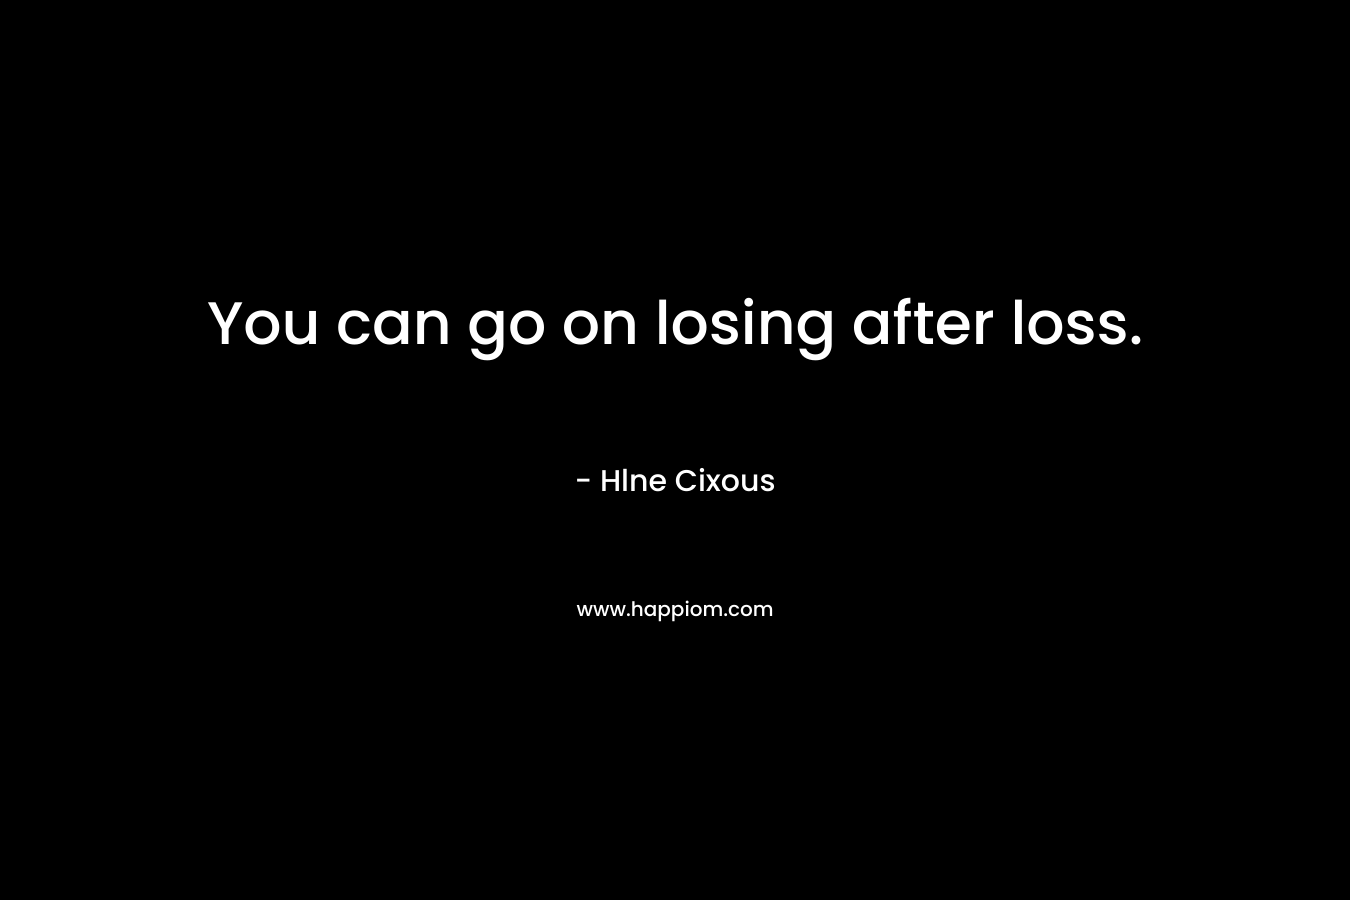 You can go on losing after loss. – Hlne Cixous